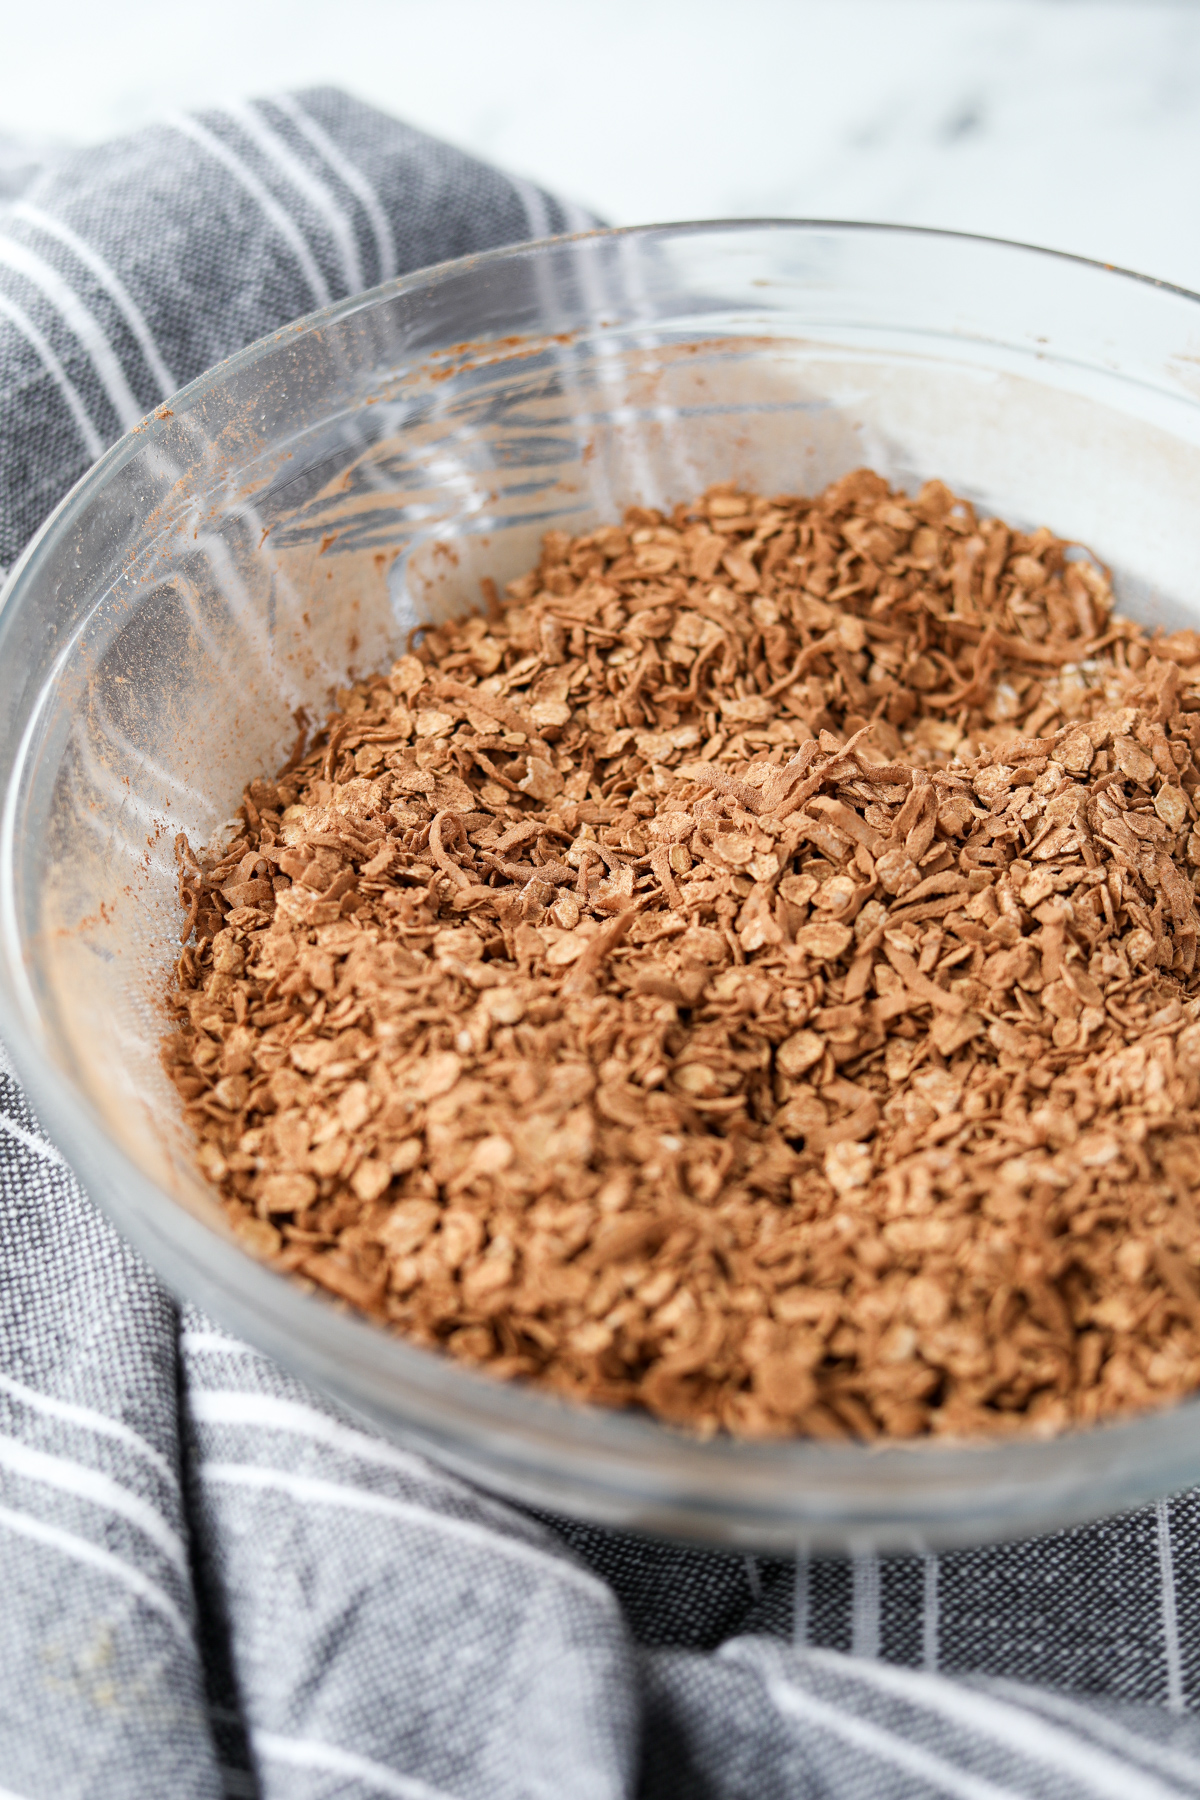 A bowl of oats and coconut that has been coated with cocoa powder.